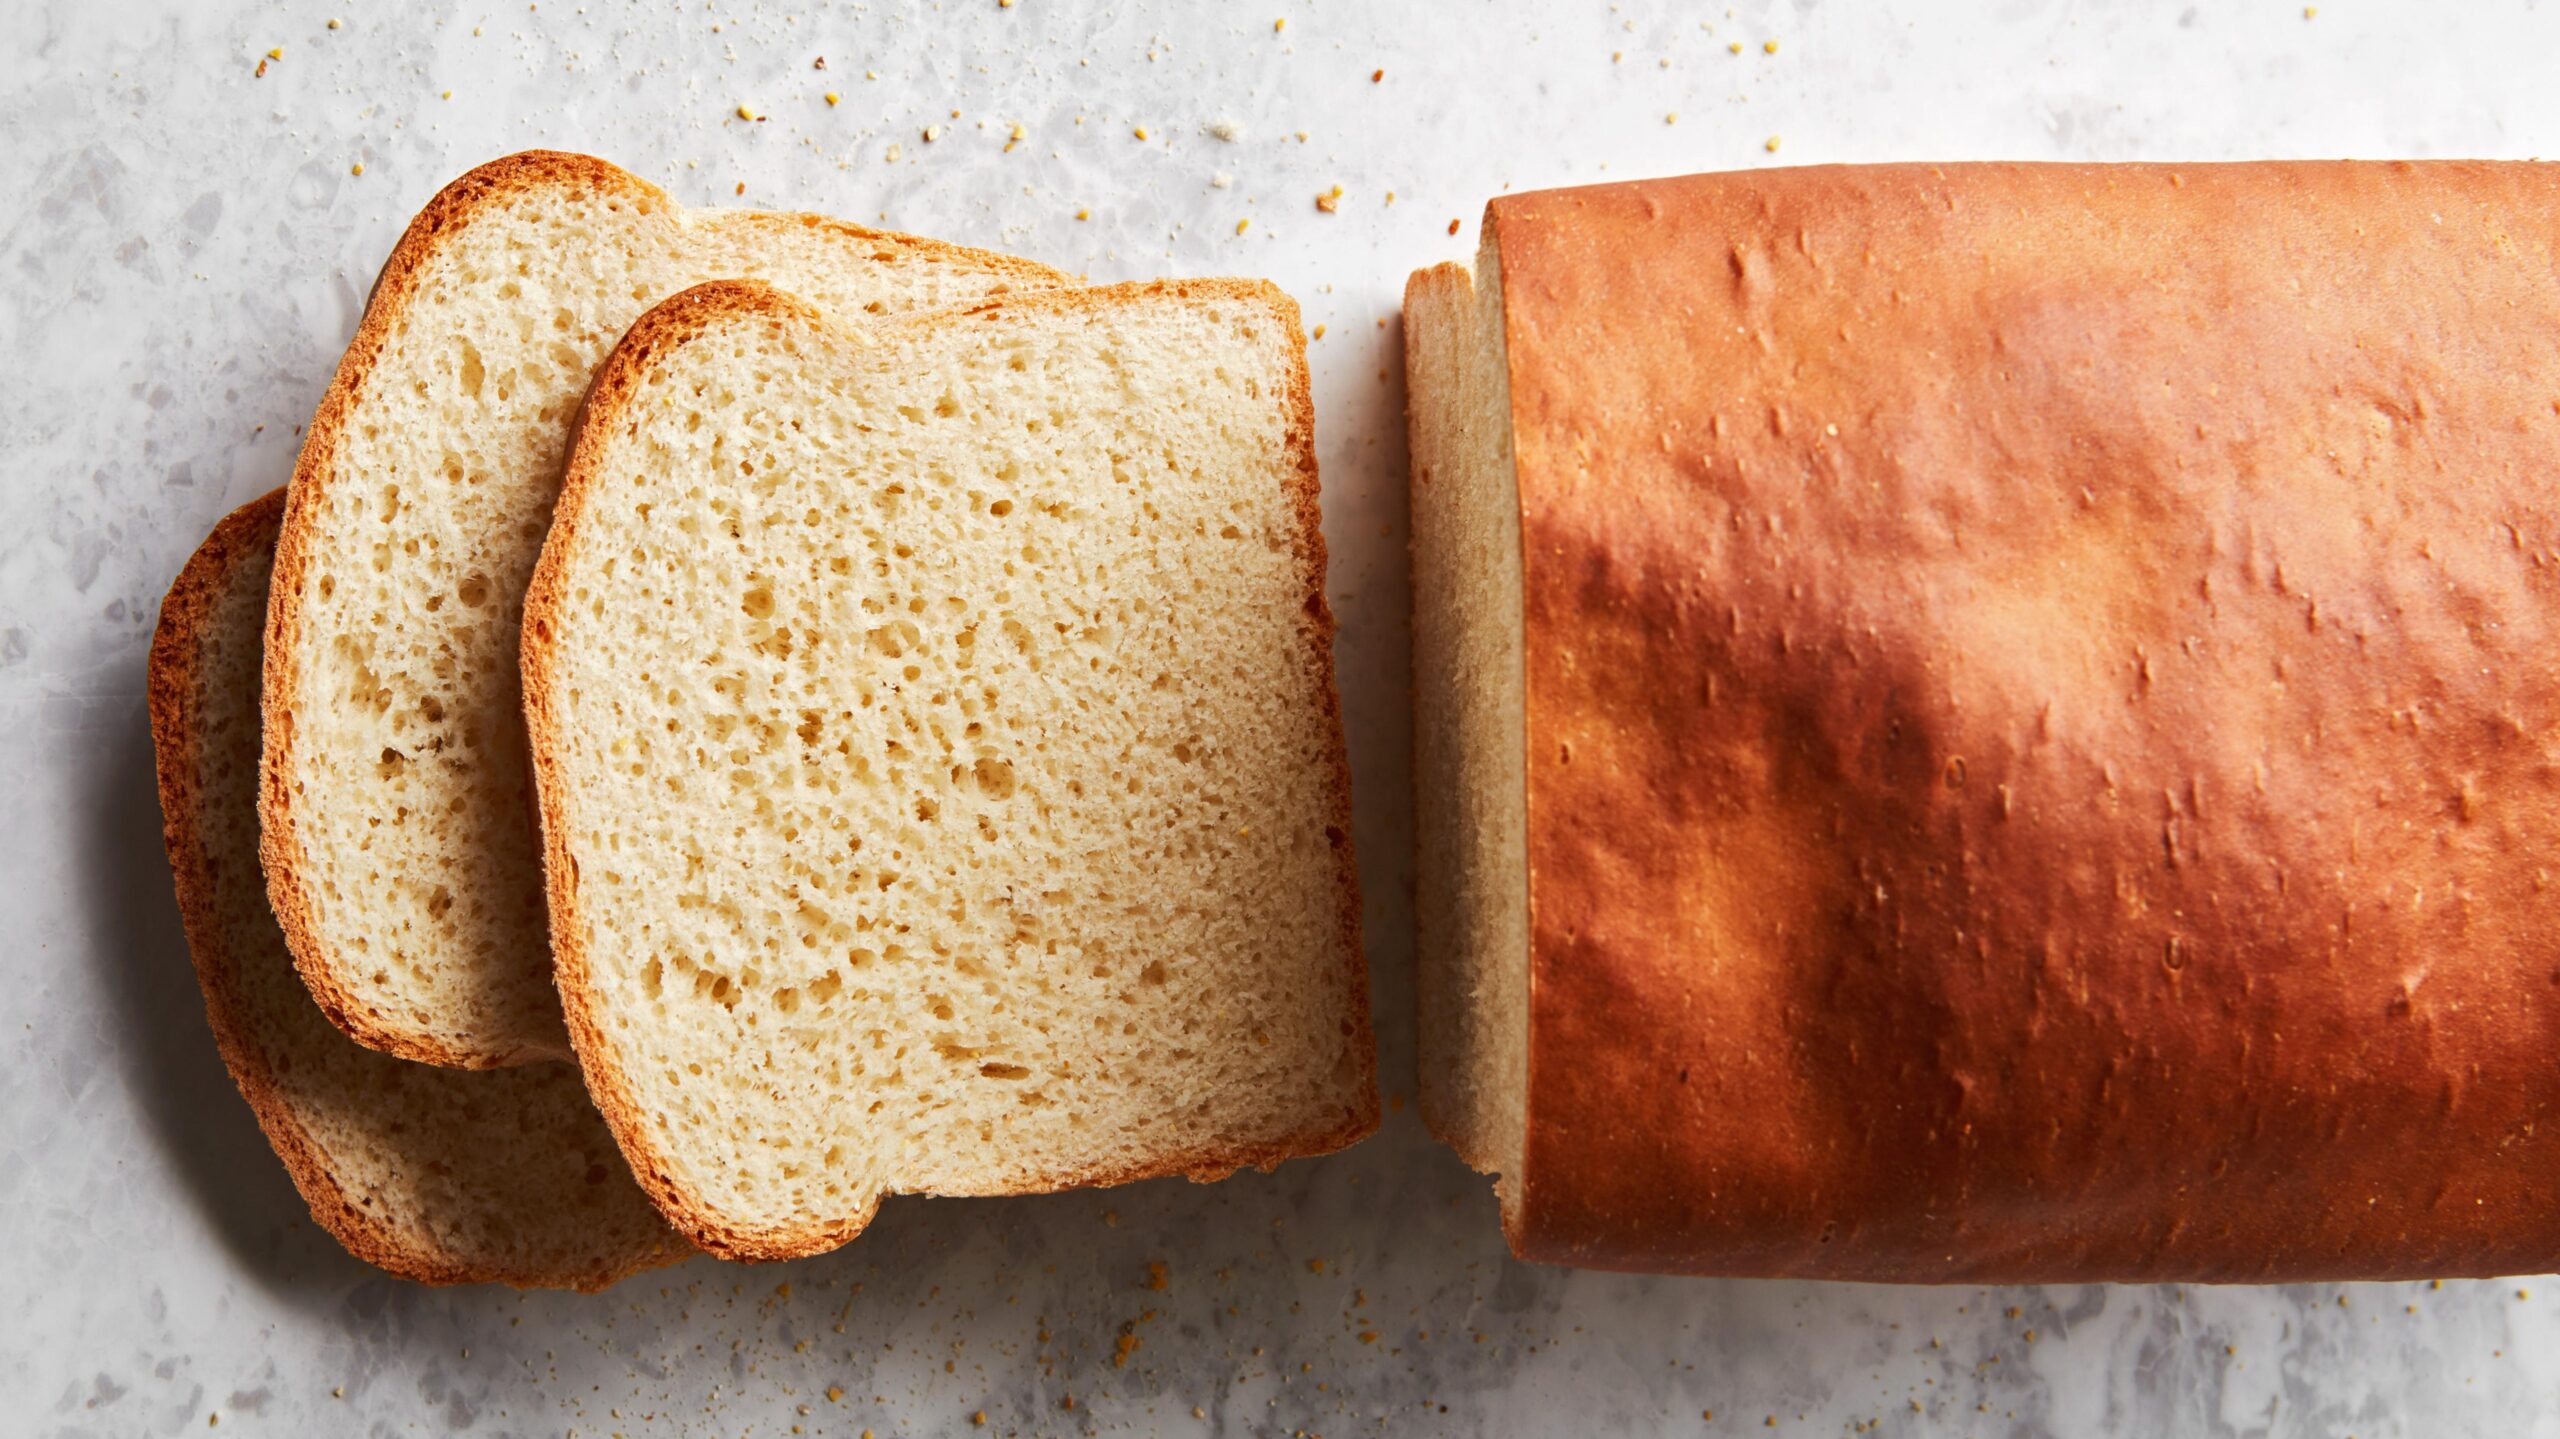  Start your day with a warm and heaping slice of this delightful bread.